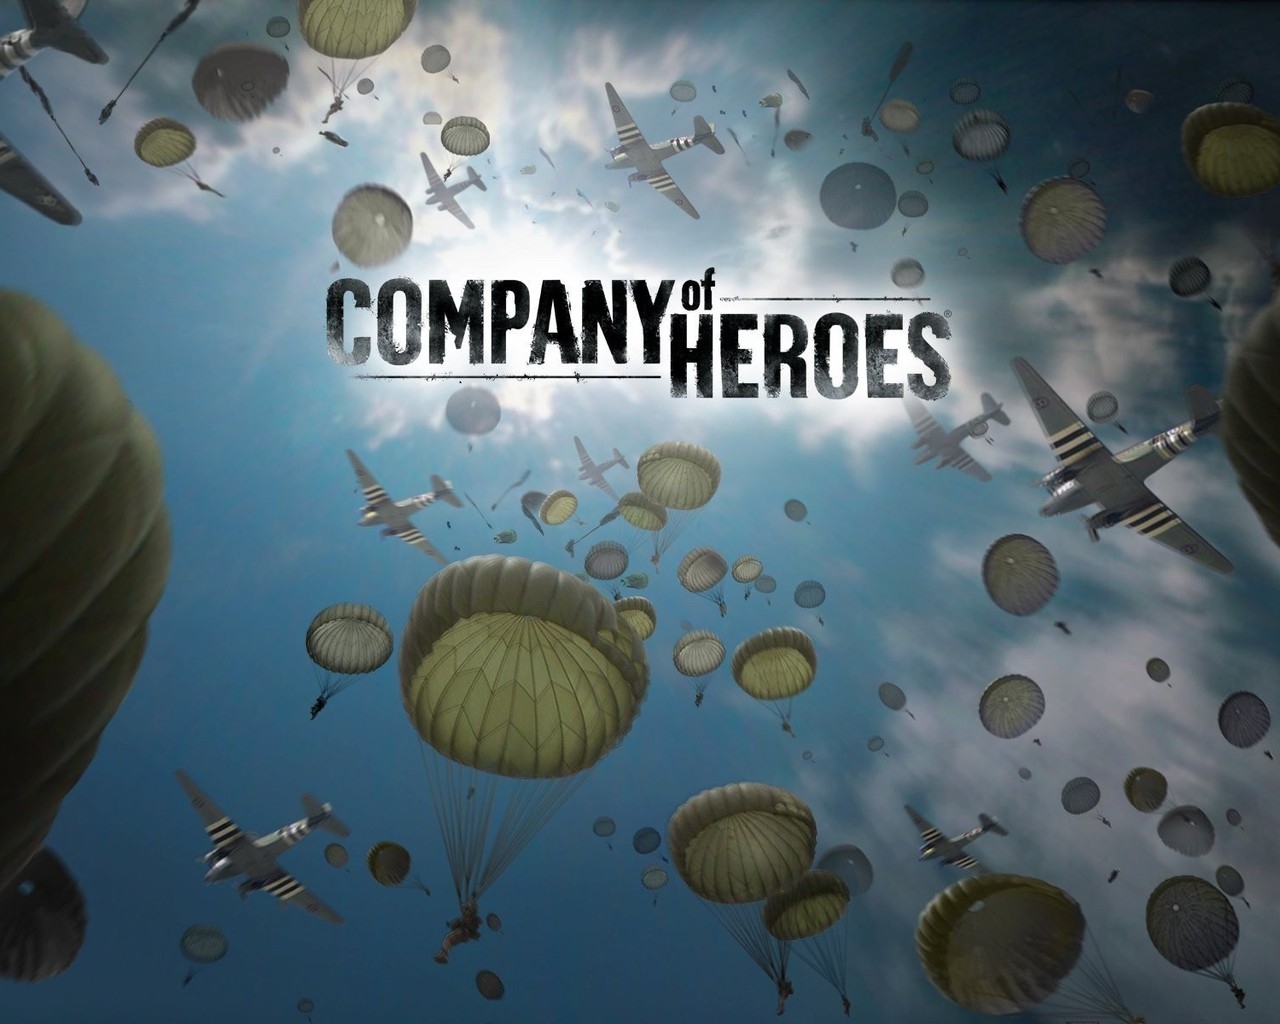 Company of Heroes for 1280 x 1024 resolution